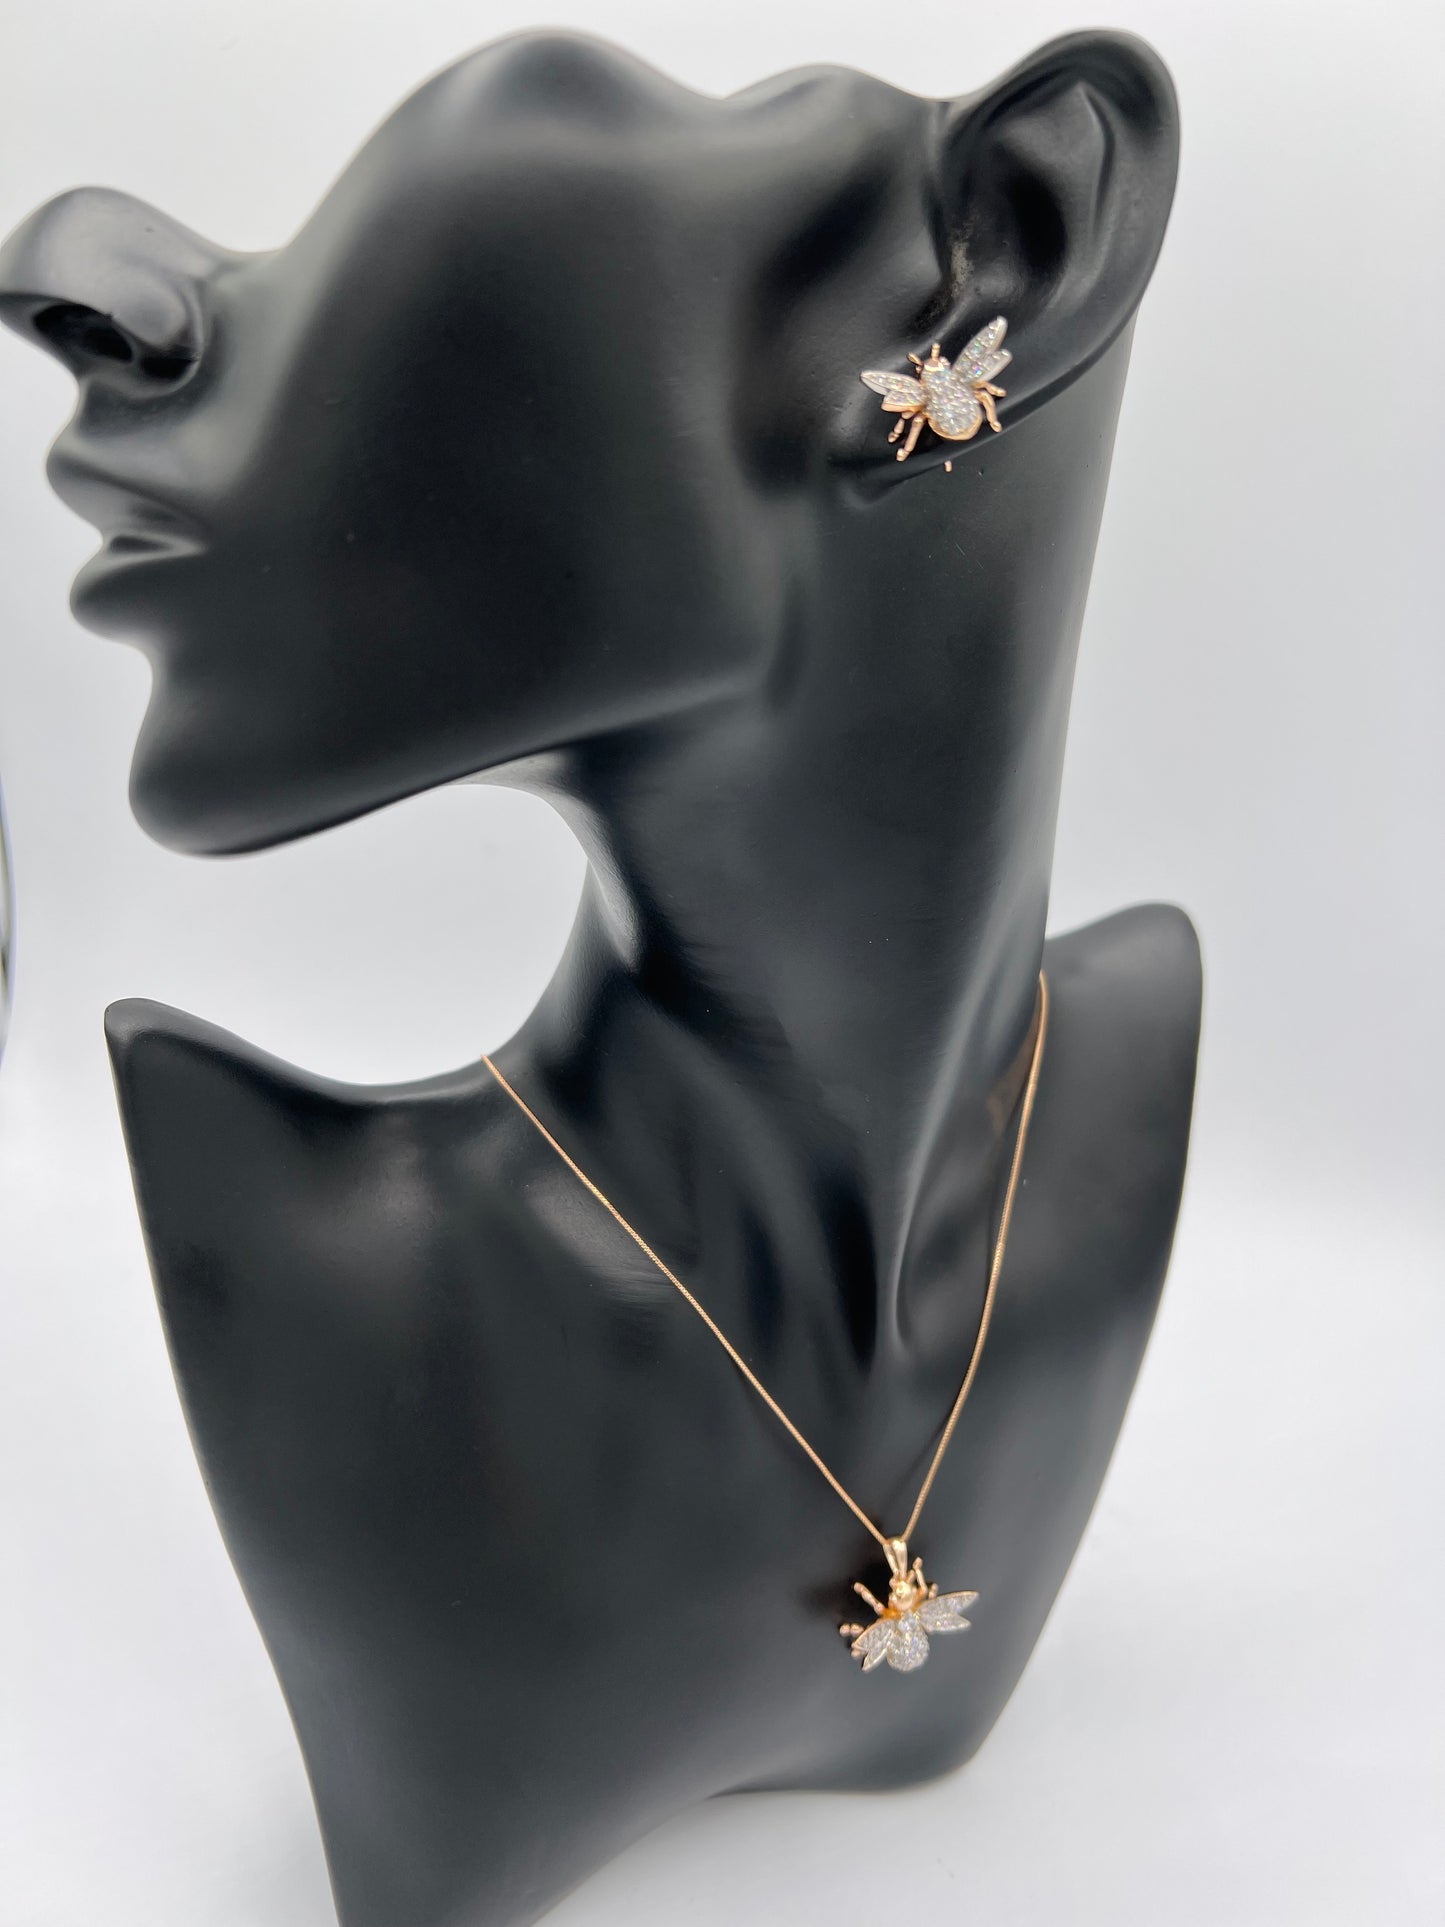 Bee Design Two Tone Earrings And Necklace Set